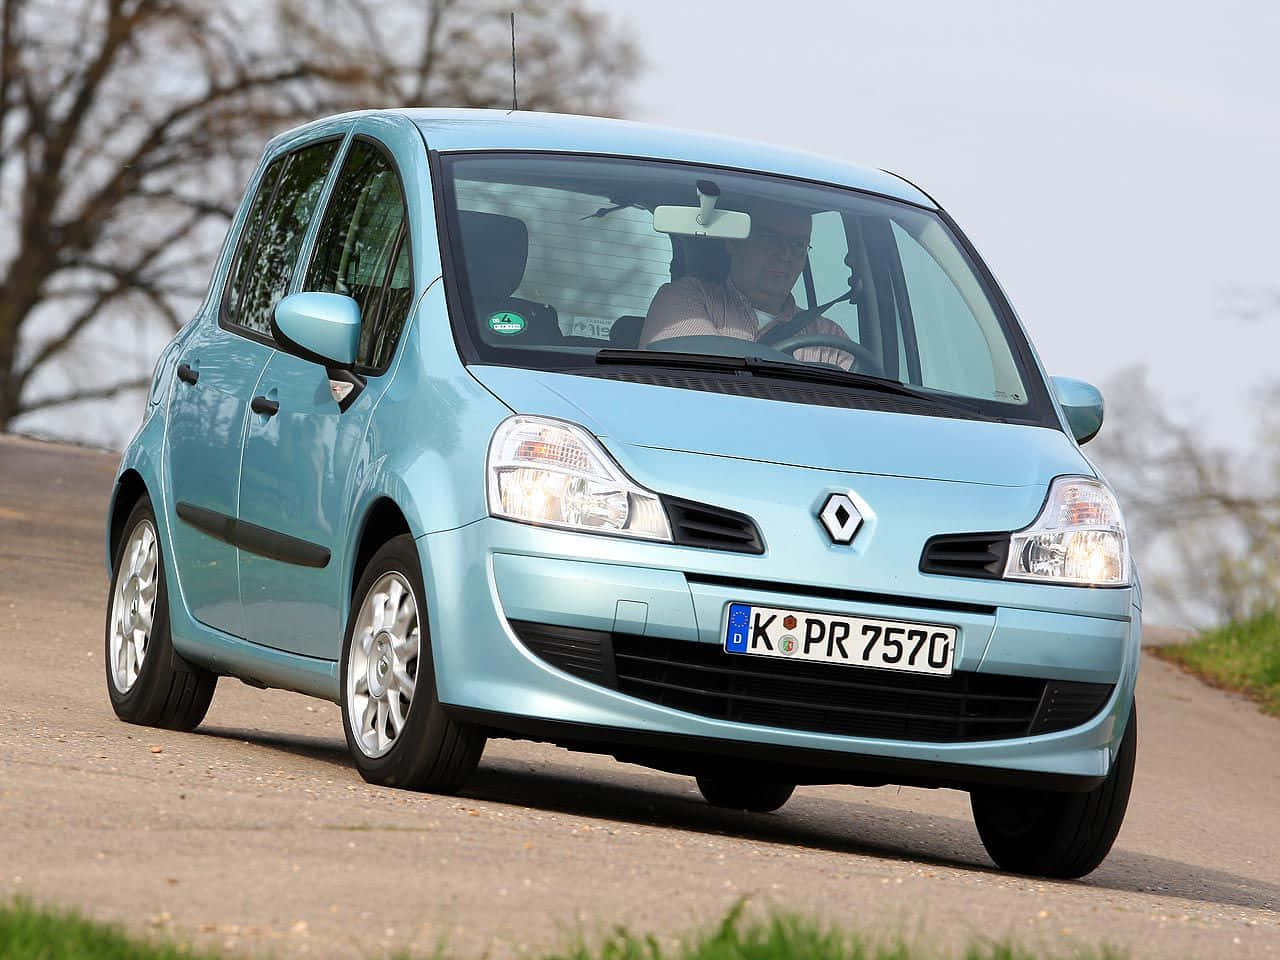 Stunning Renault Modus on the road Wallpaper